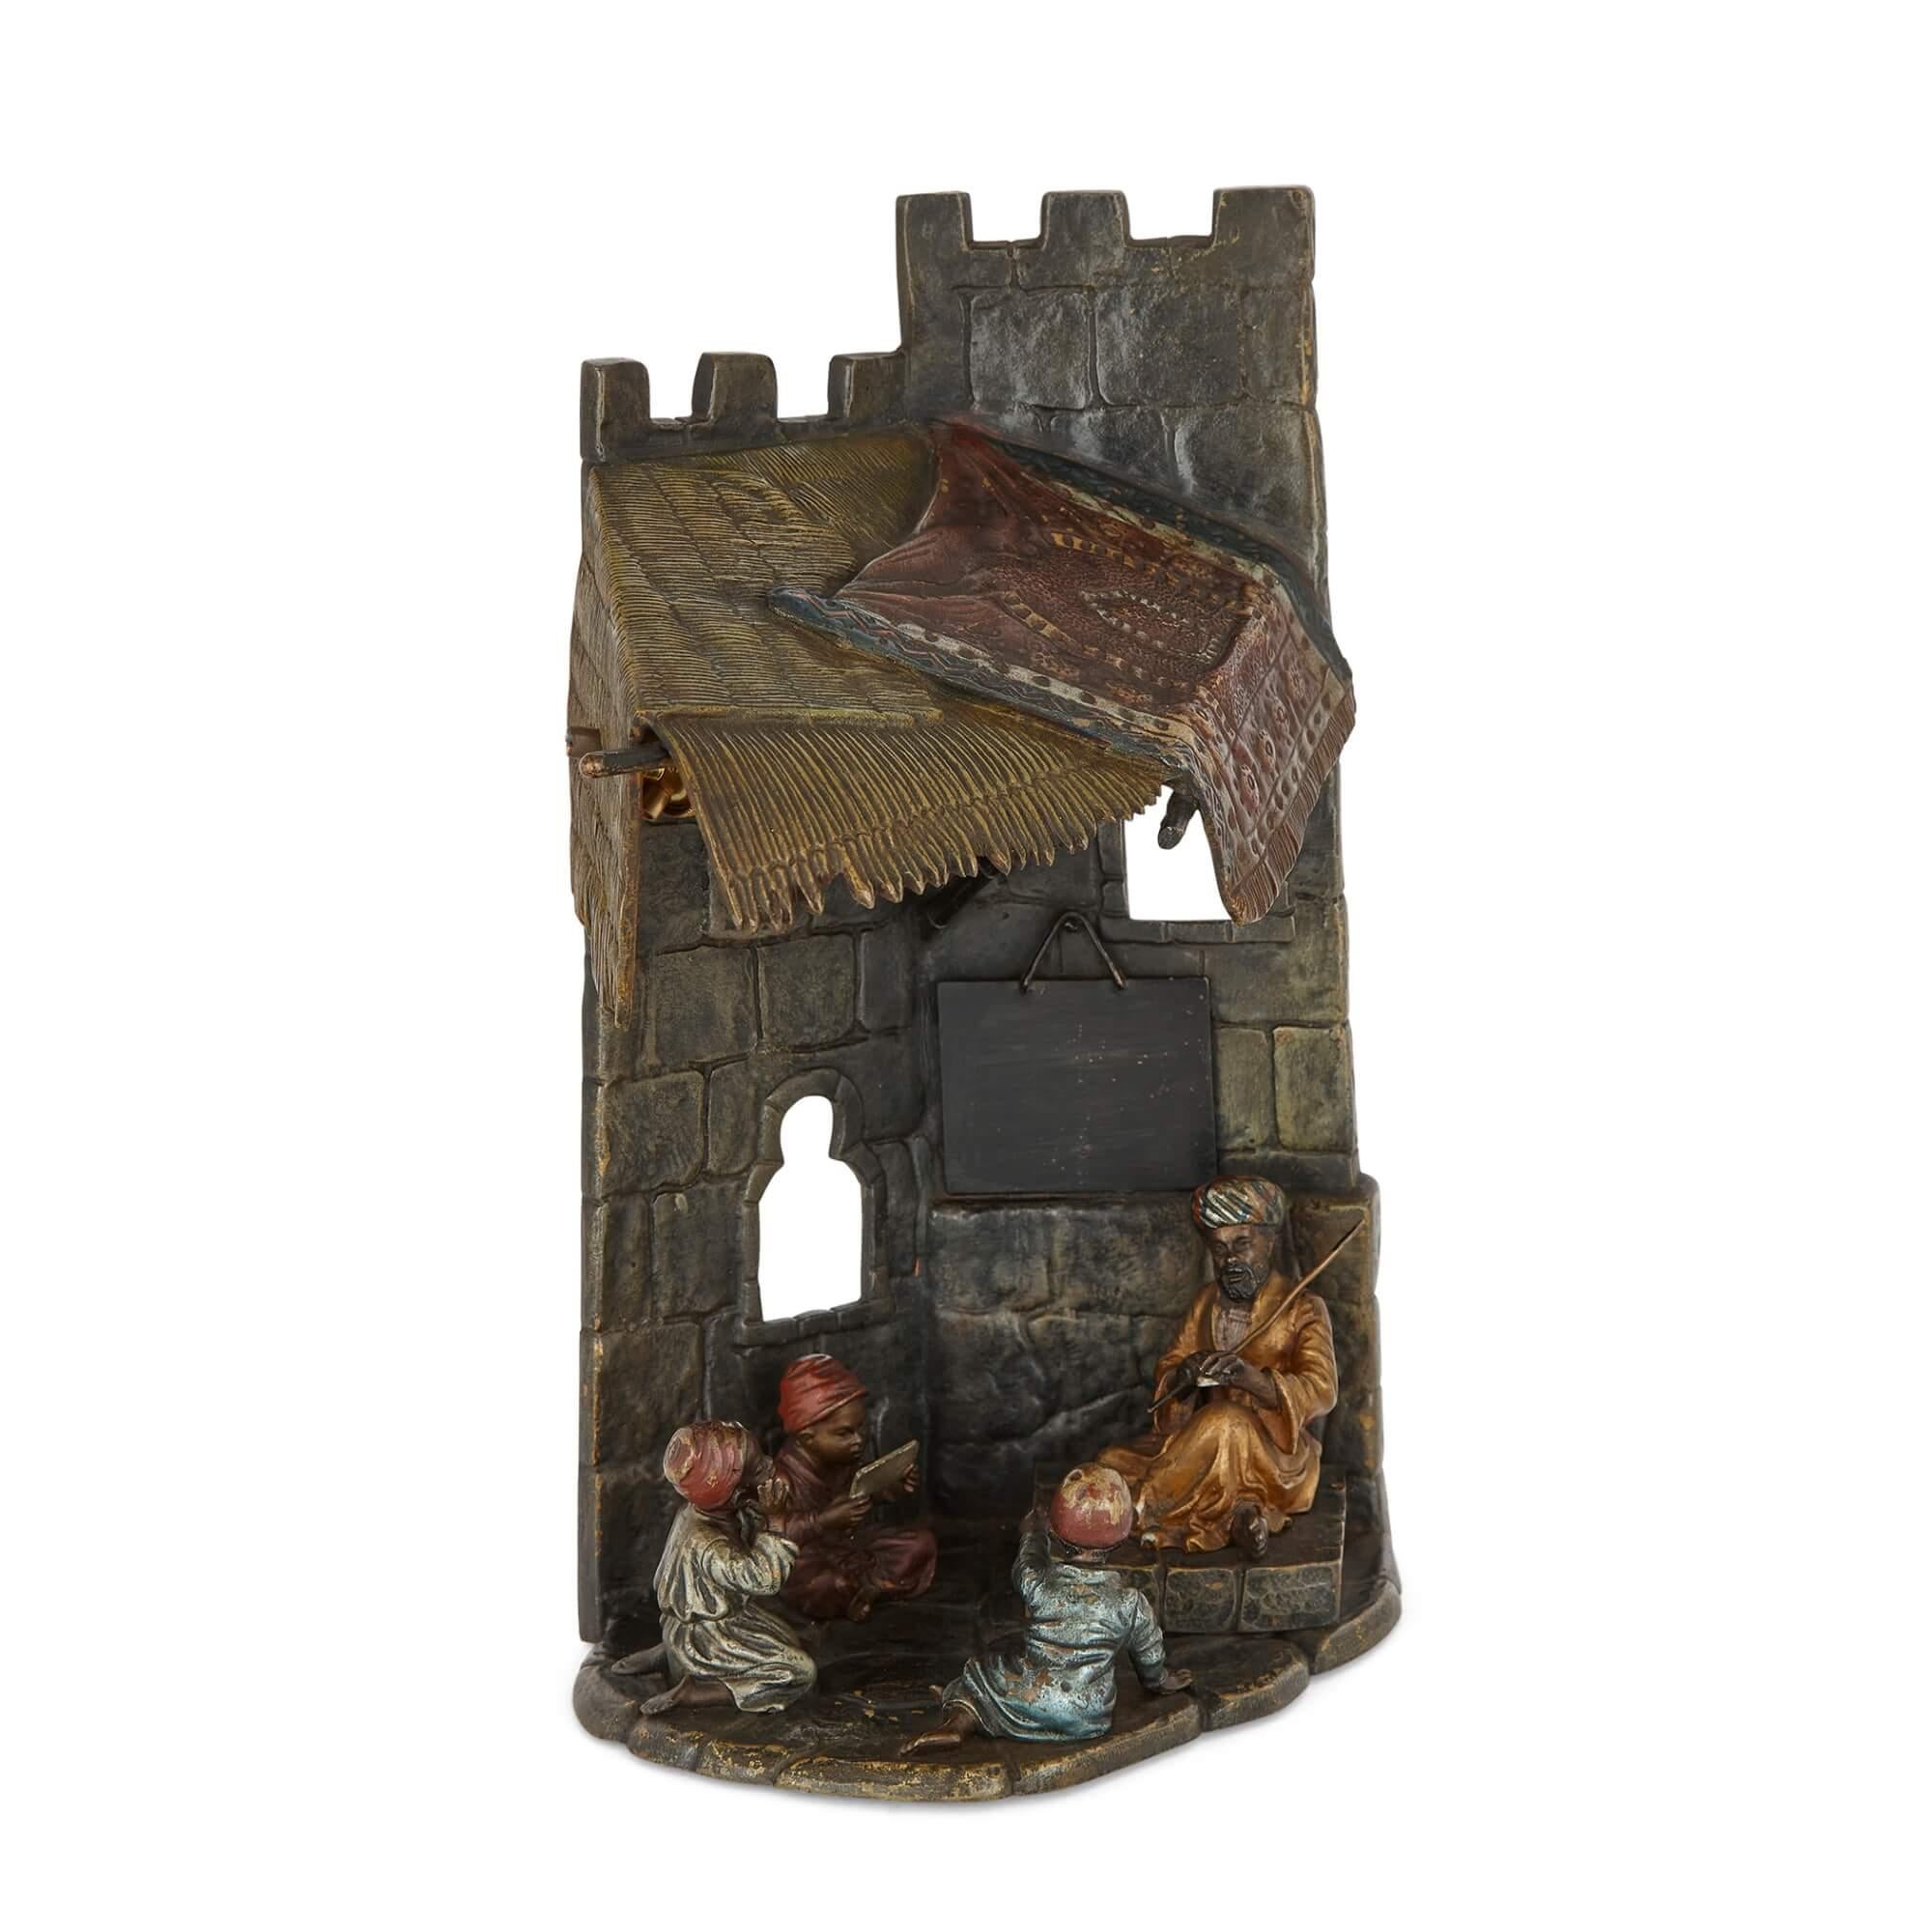 Antique Austrian Orientalist cold-painted bronze lamp 
Austrian, Early 20th Century
Height 25cm, width 16cm, depth 12cm

Depicting a charming school scene, this Orientalist lamp wrought in the traditional Viennese manner from cold-painted bronze is